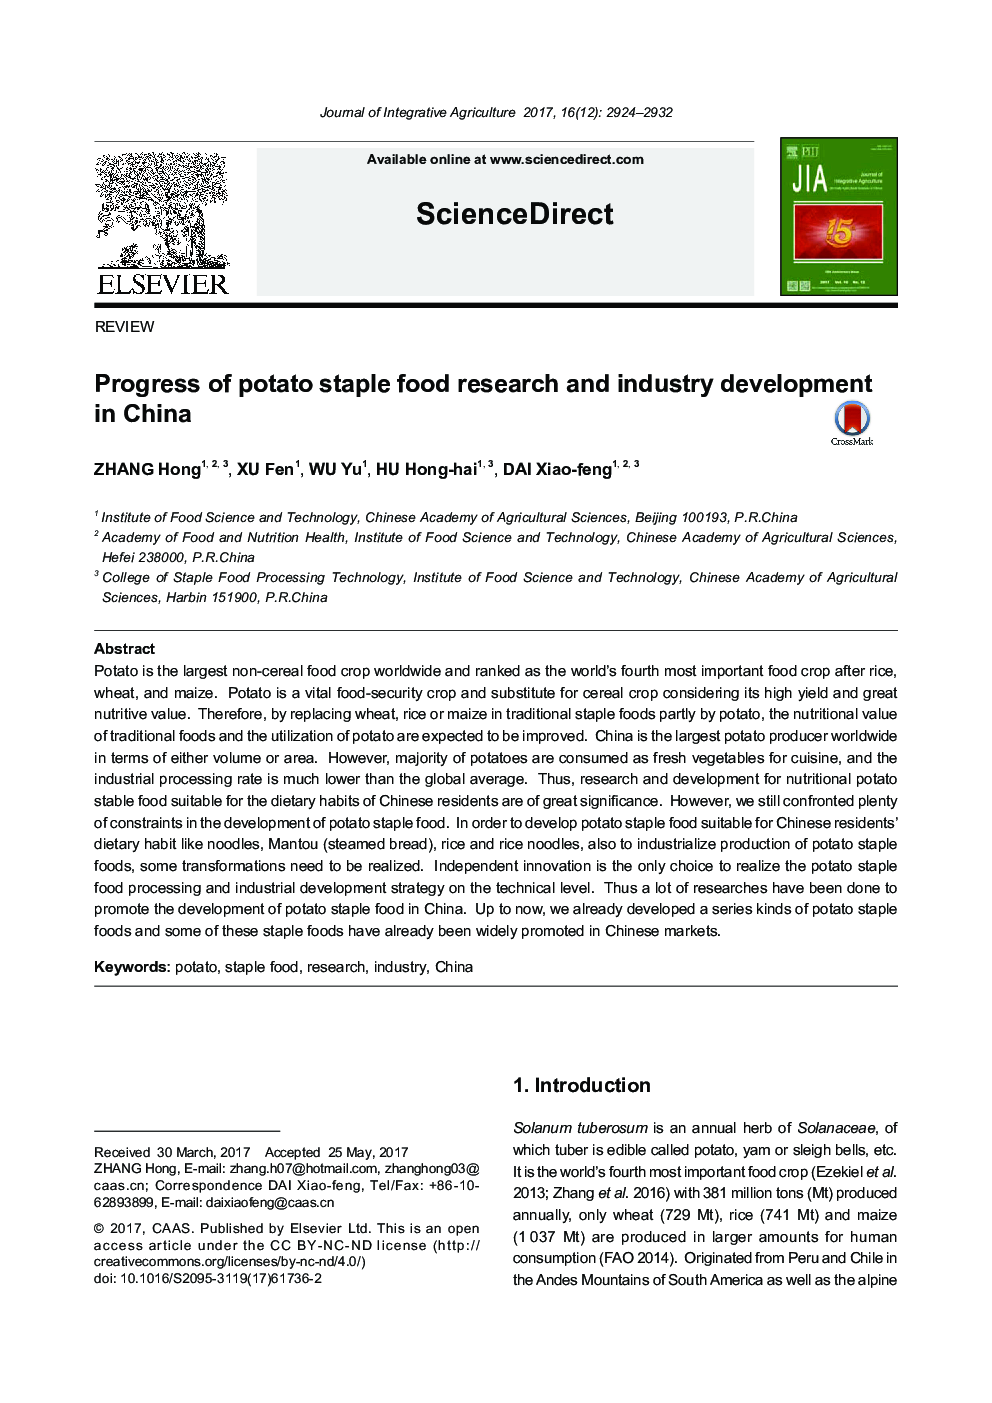 Progress of potato staple food research and industry development in China